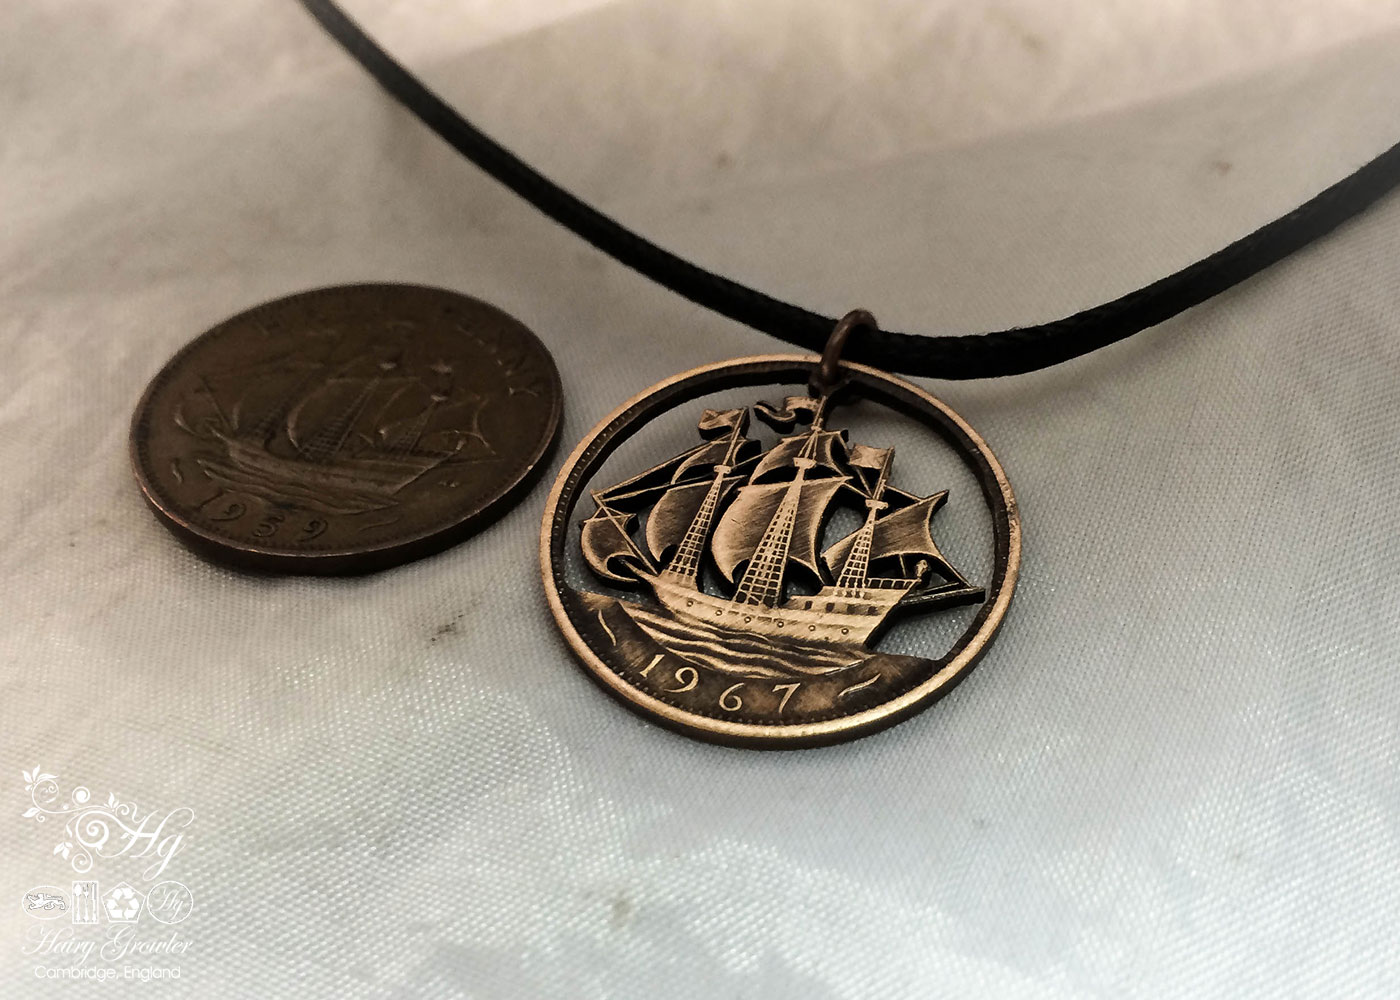 Handcrafted and repurposed Golden Hind ship coin pendant necklace